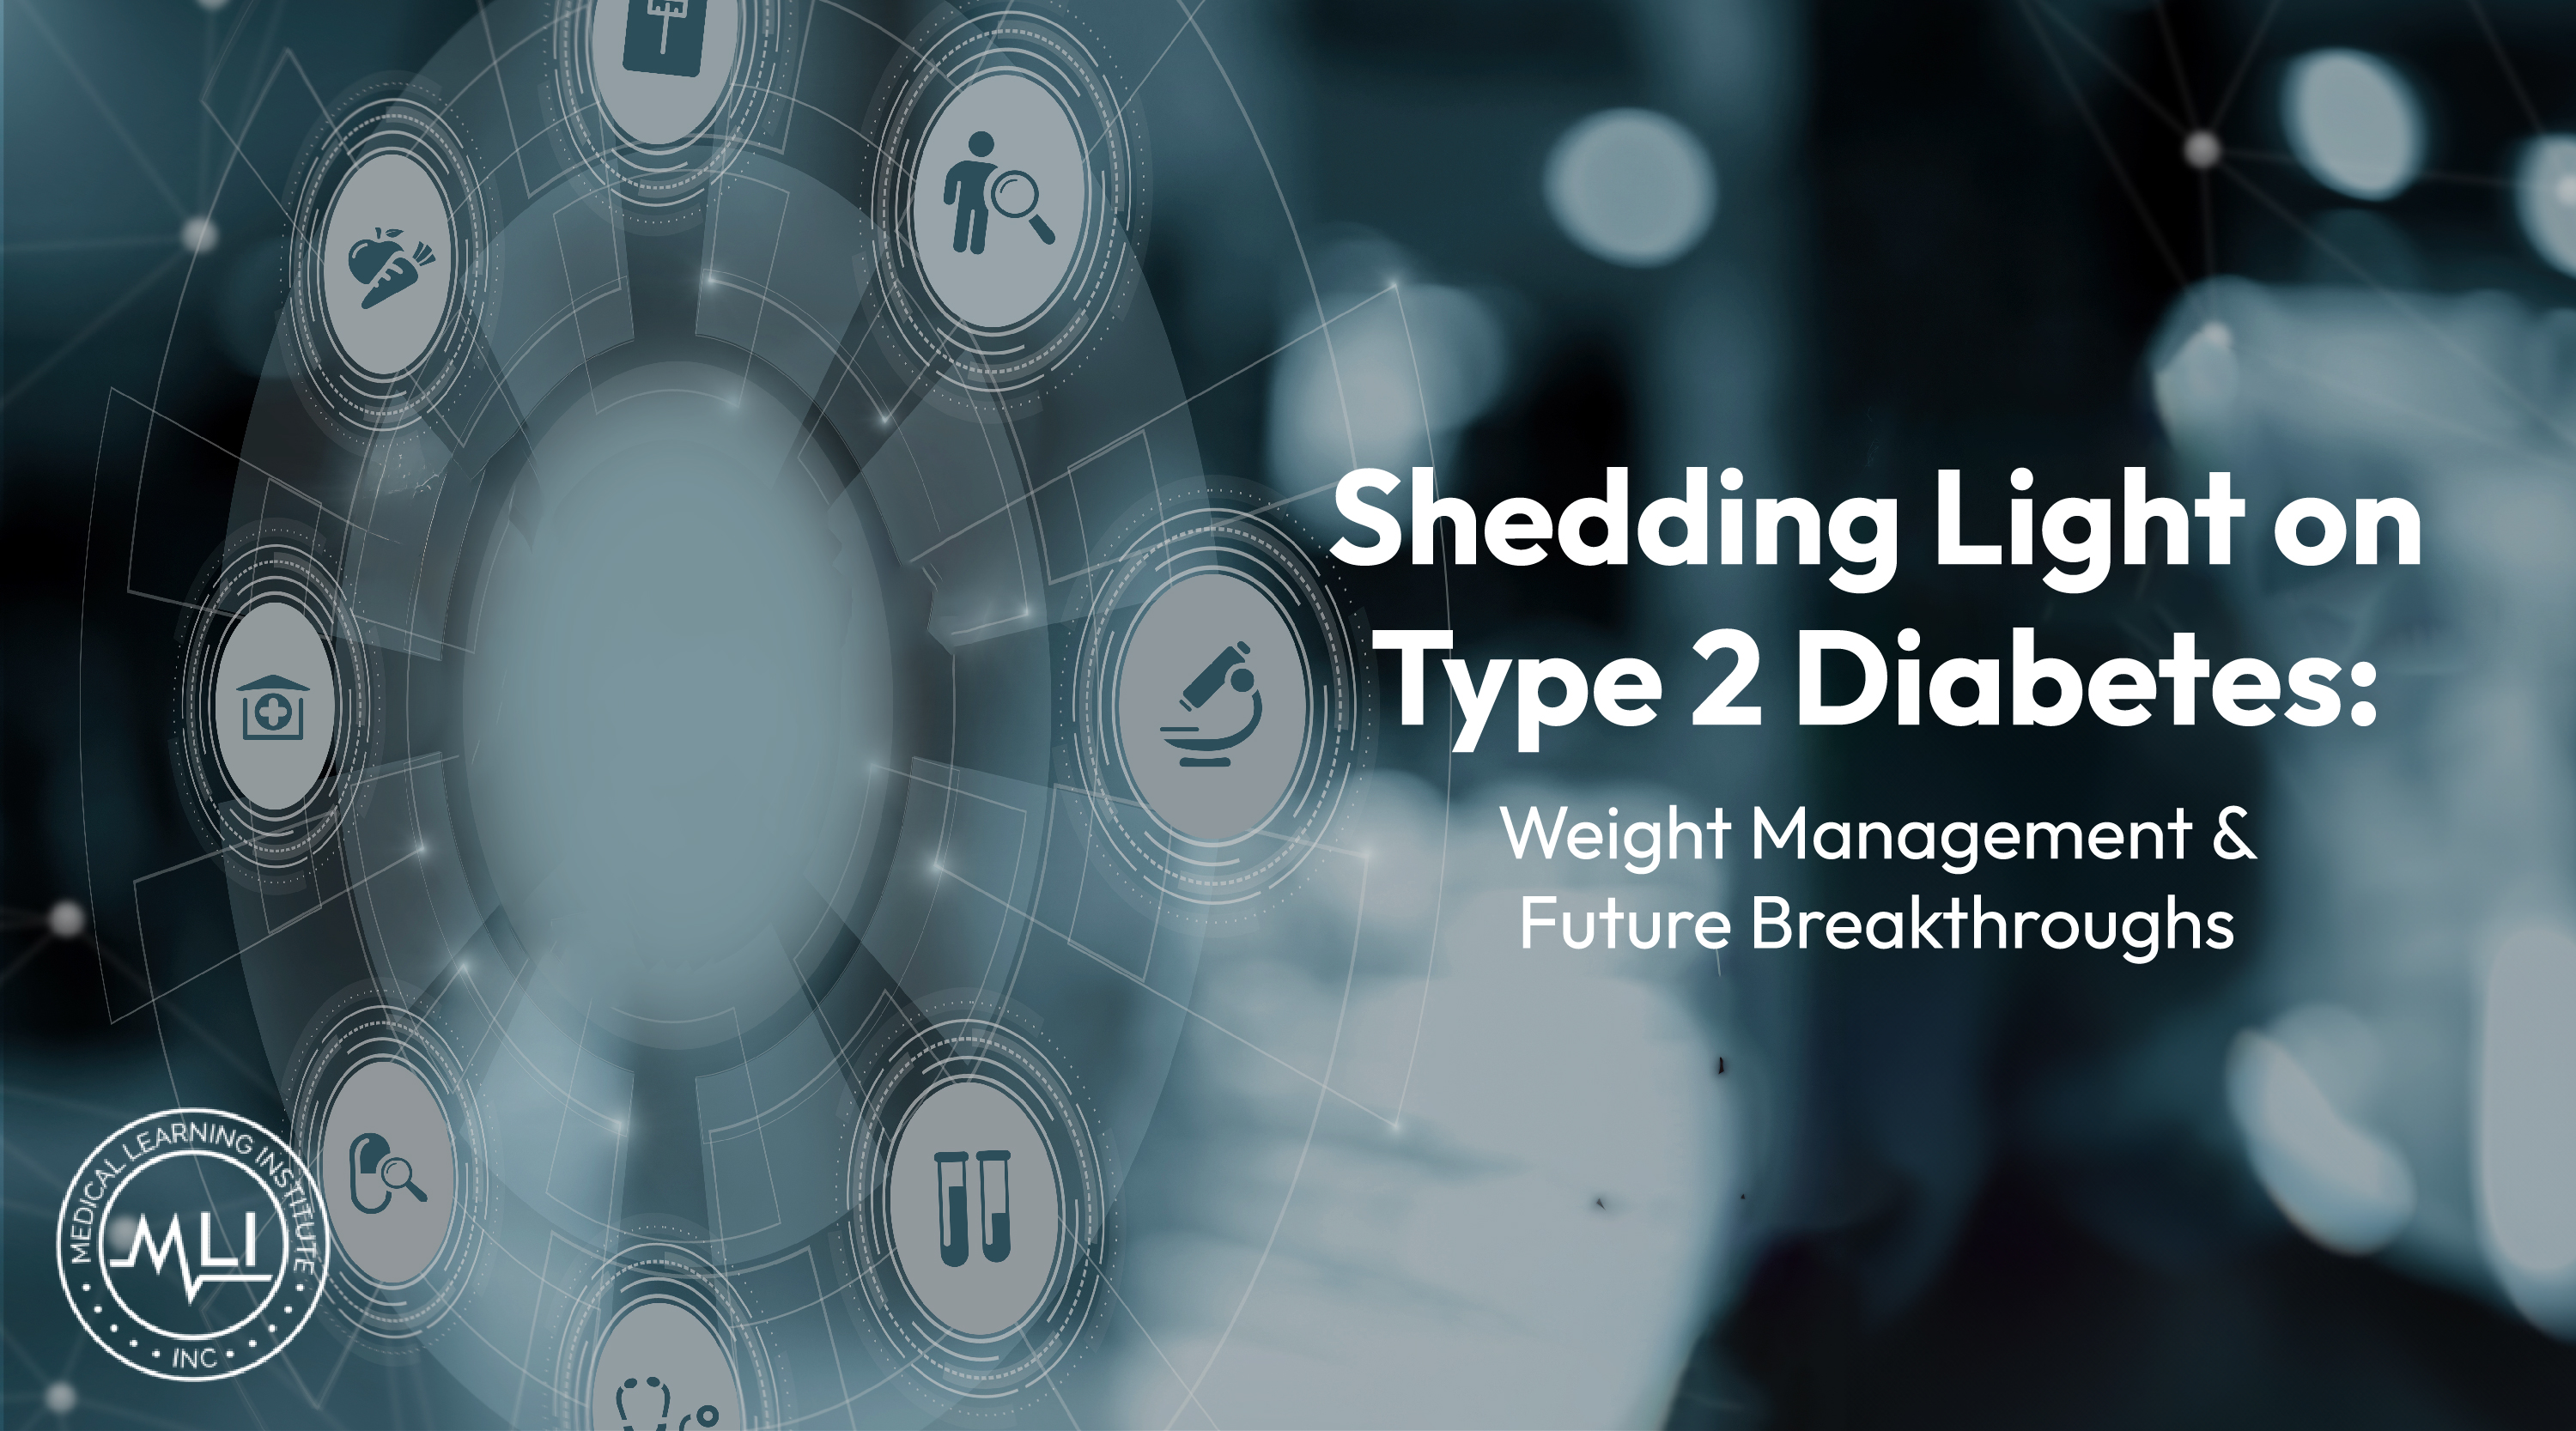 Shedding Light on Type 2 Diabetes: Weight Management & Future Breakthroughs - Case Studies and Practice Considerations